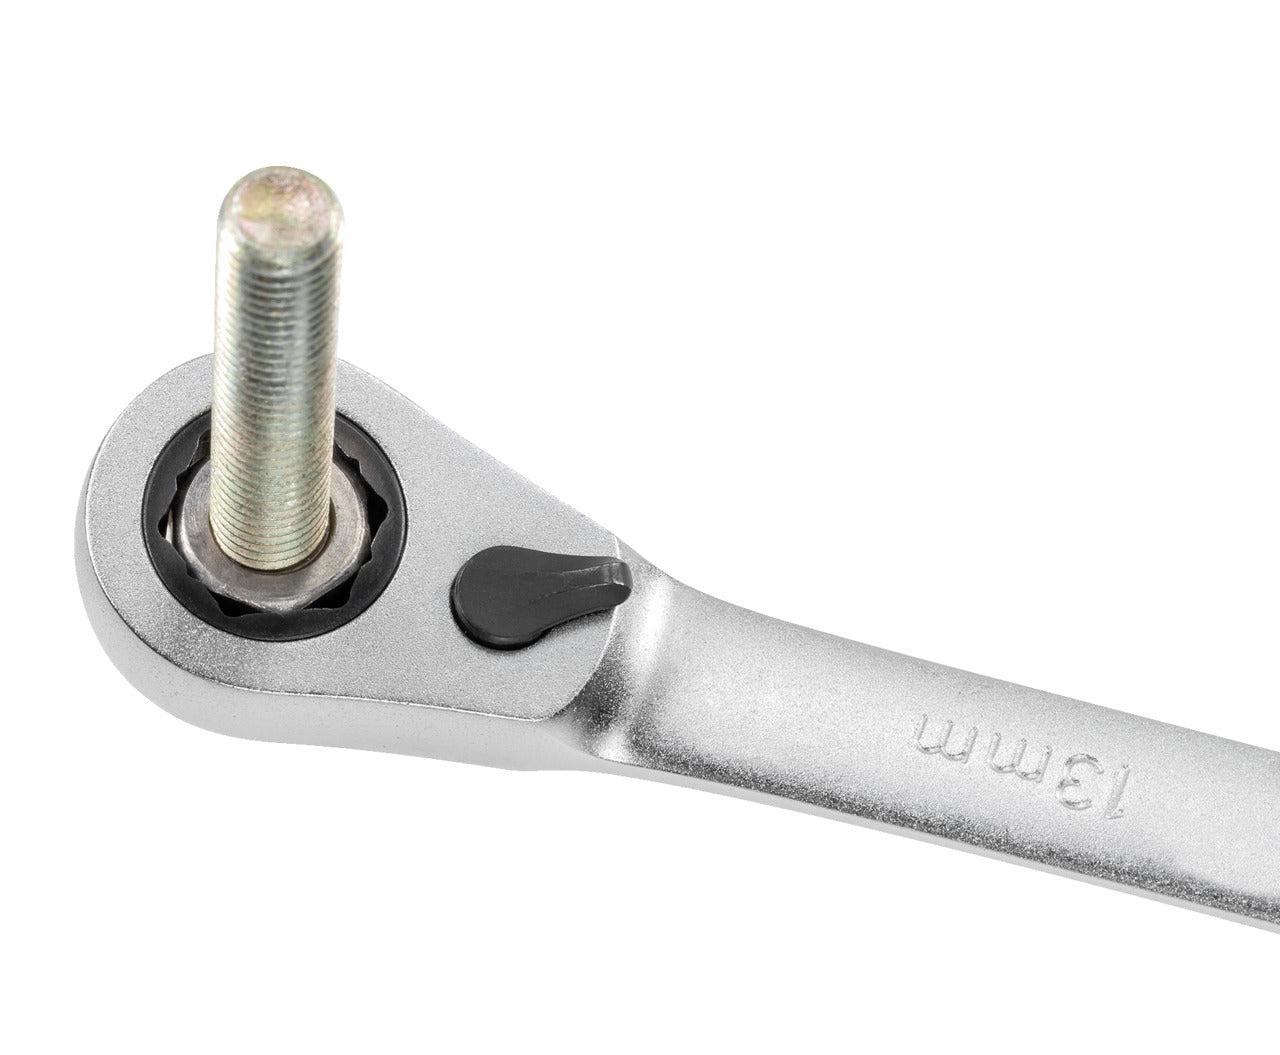 GEDOREred R07201100 - Reversible ratchet combination wrench with clamping function, 10mm (3301004)